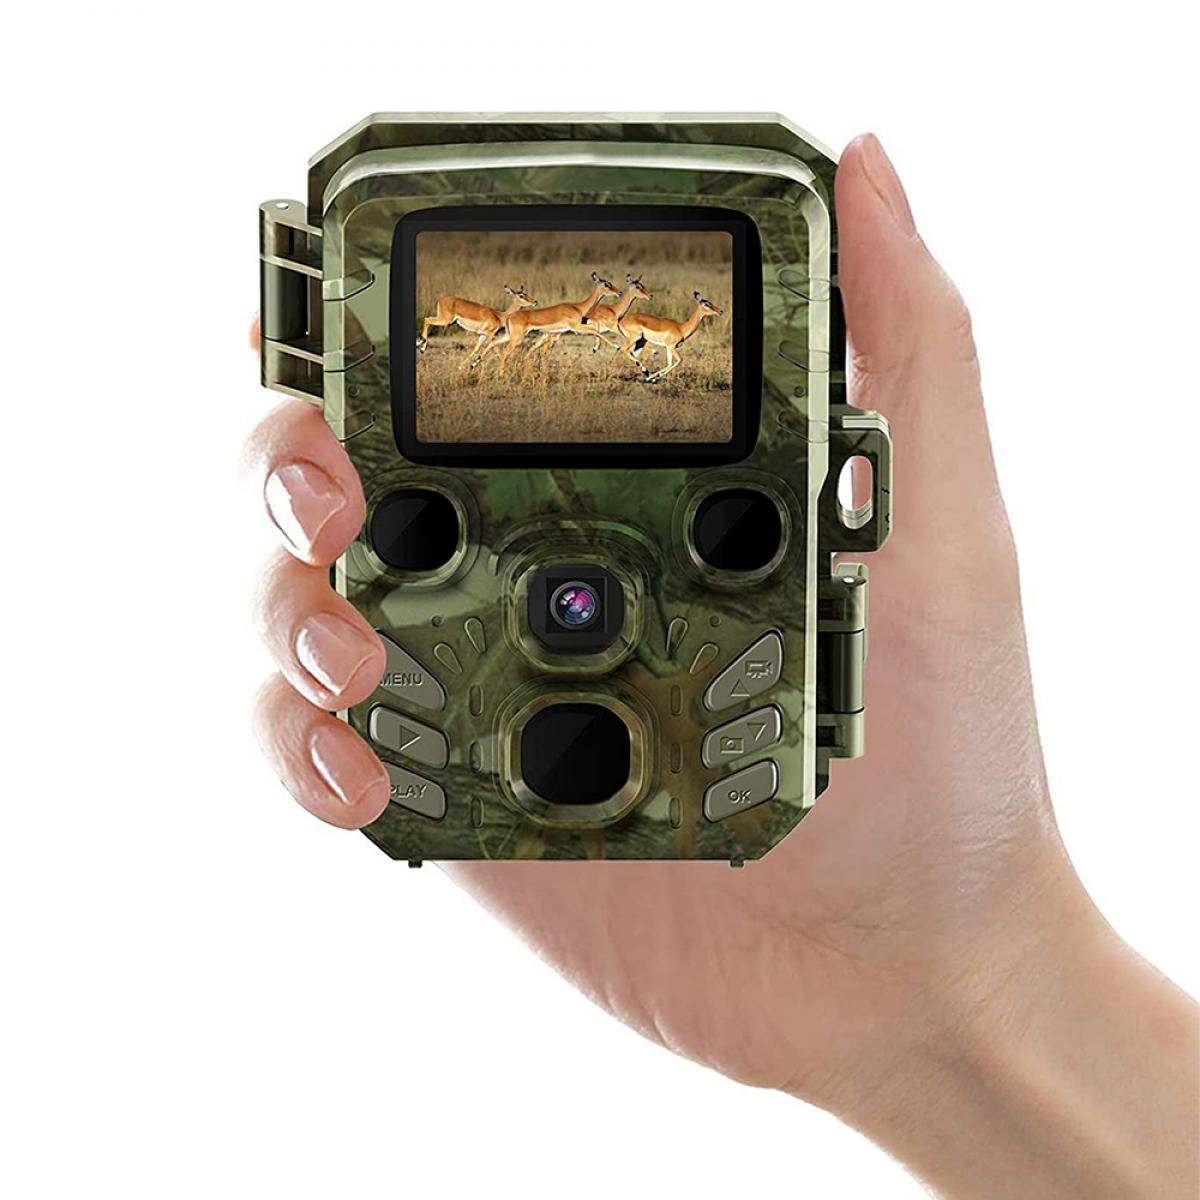 Details about   Trail Camera Game Wildlife Animal Scouting Waterproof Night Vision 16MP 1080P 